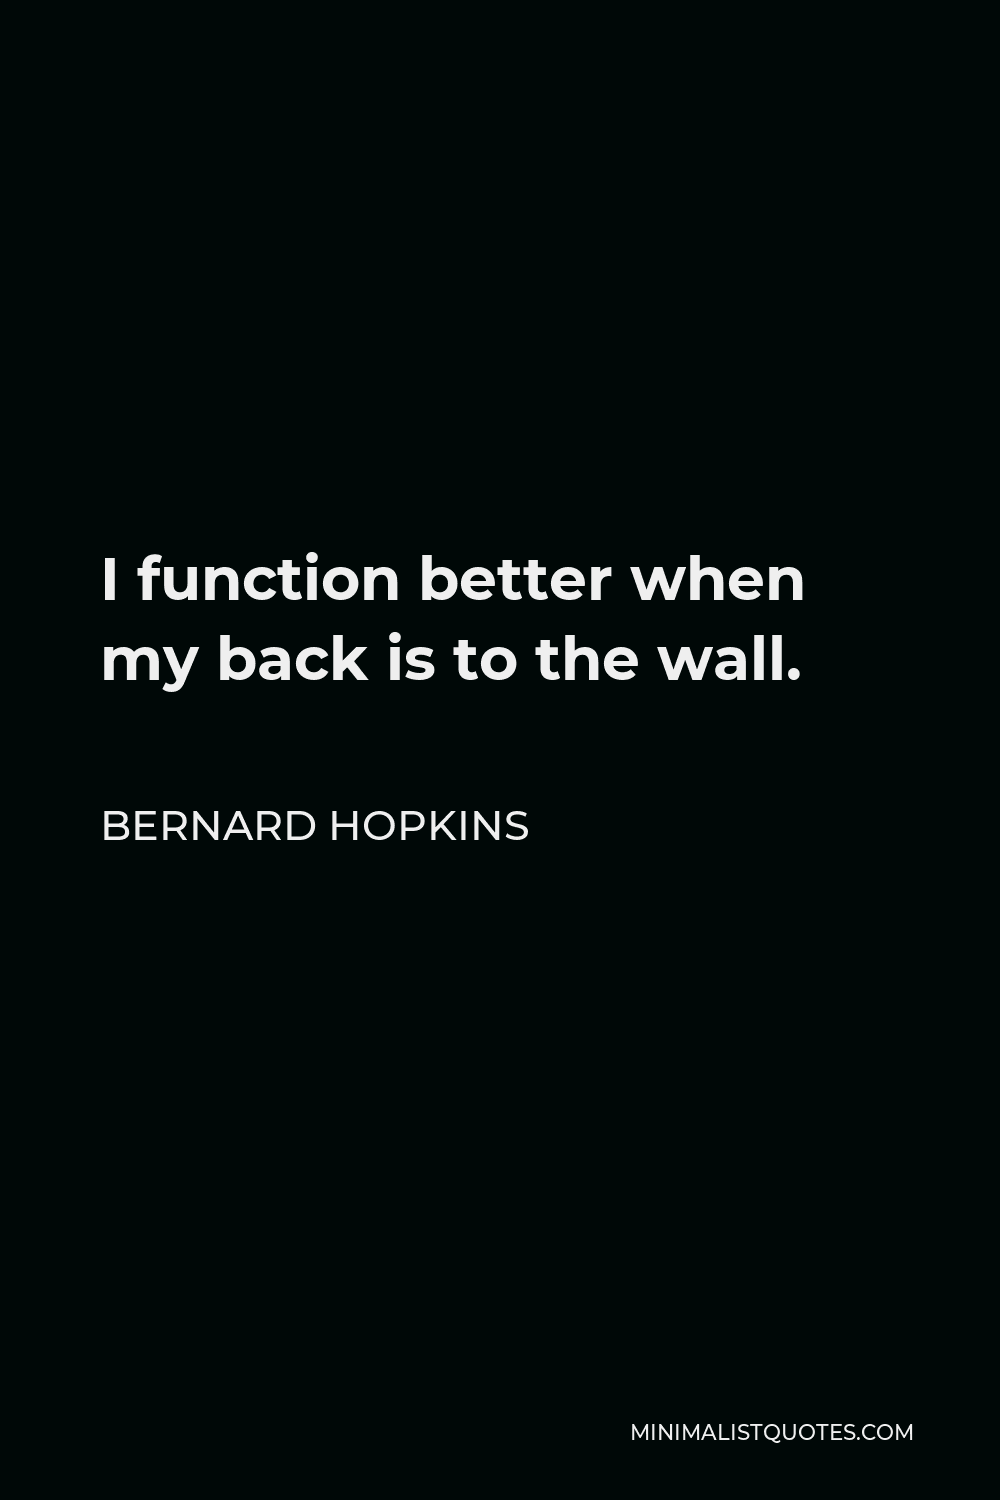 Bernard Hopkins Quote - I function better when my back is to the wall.